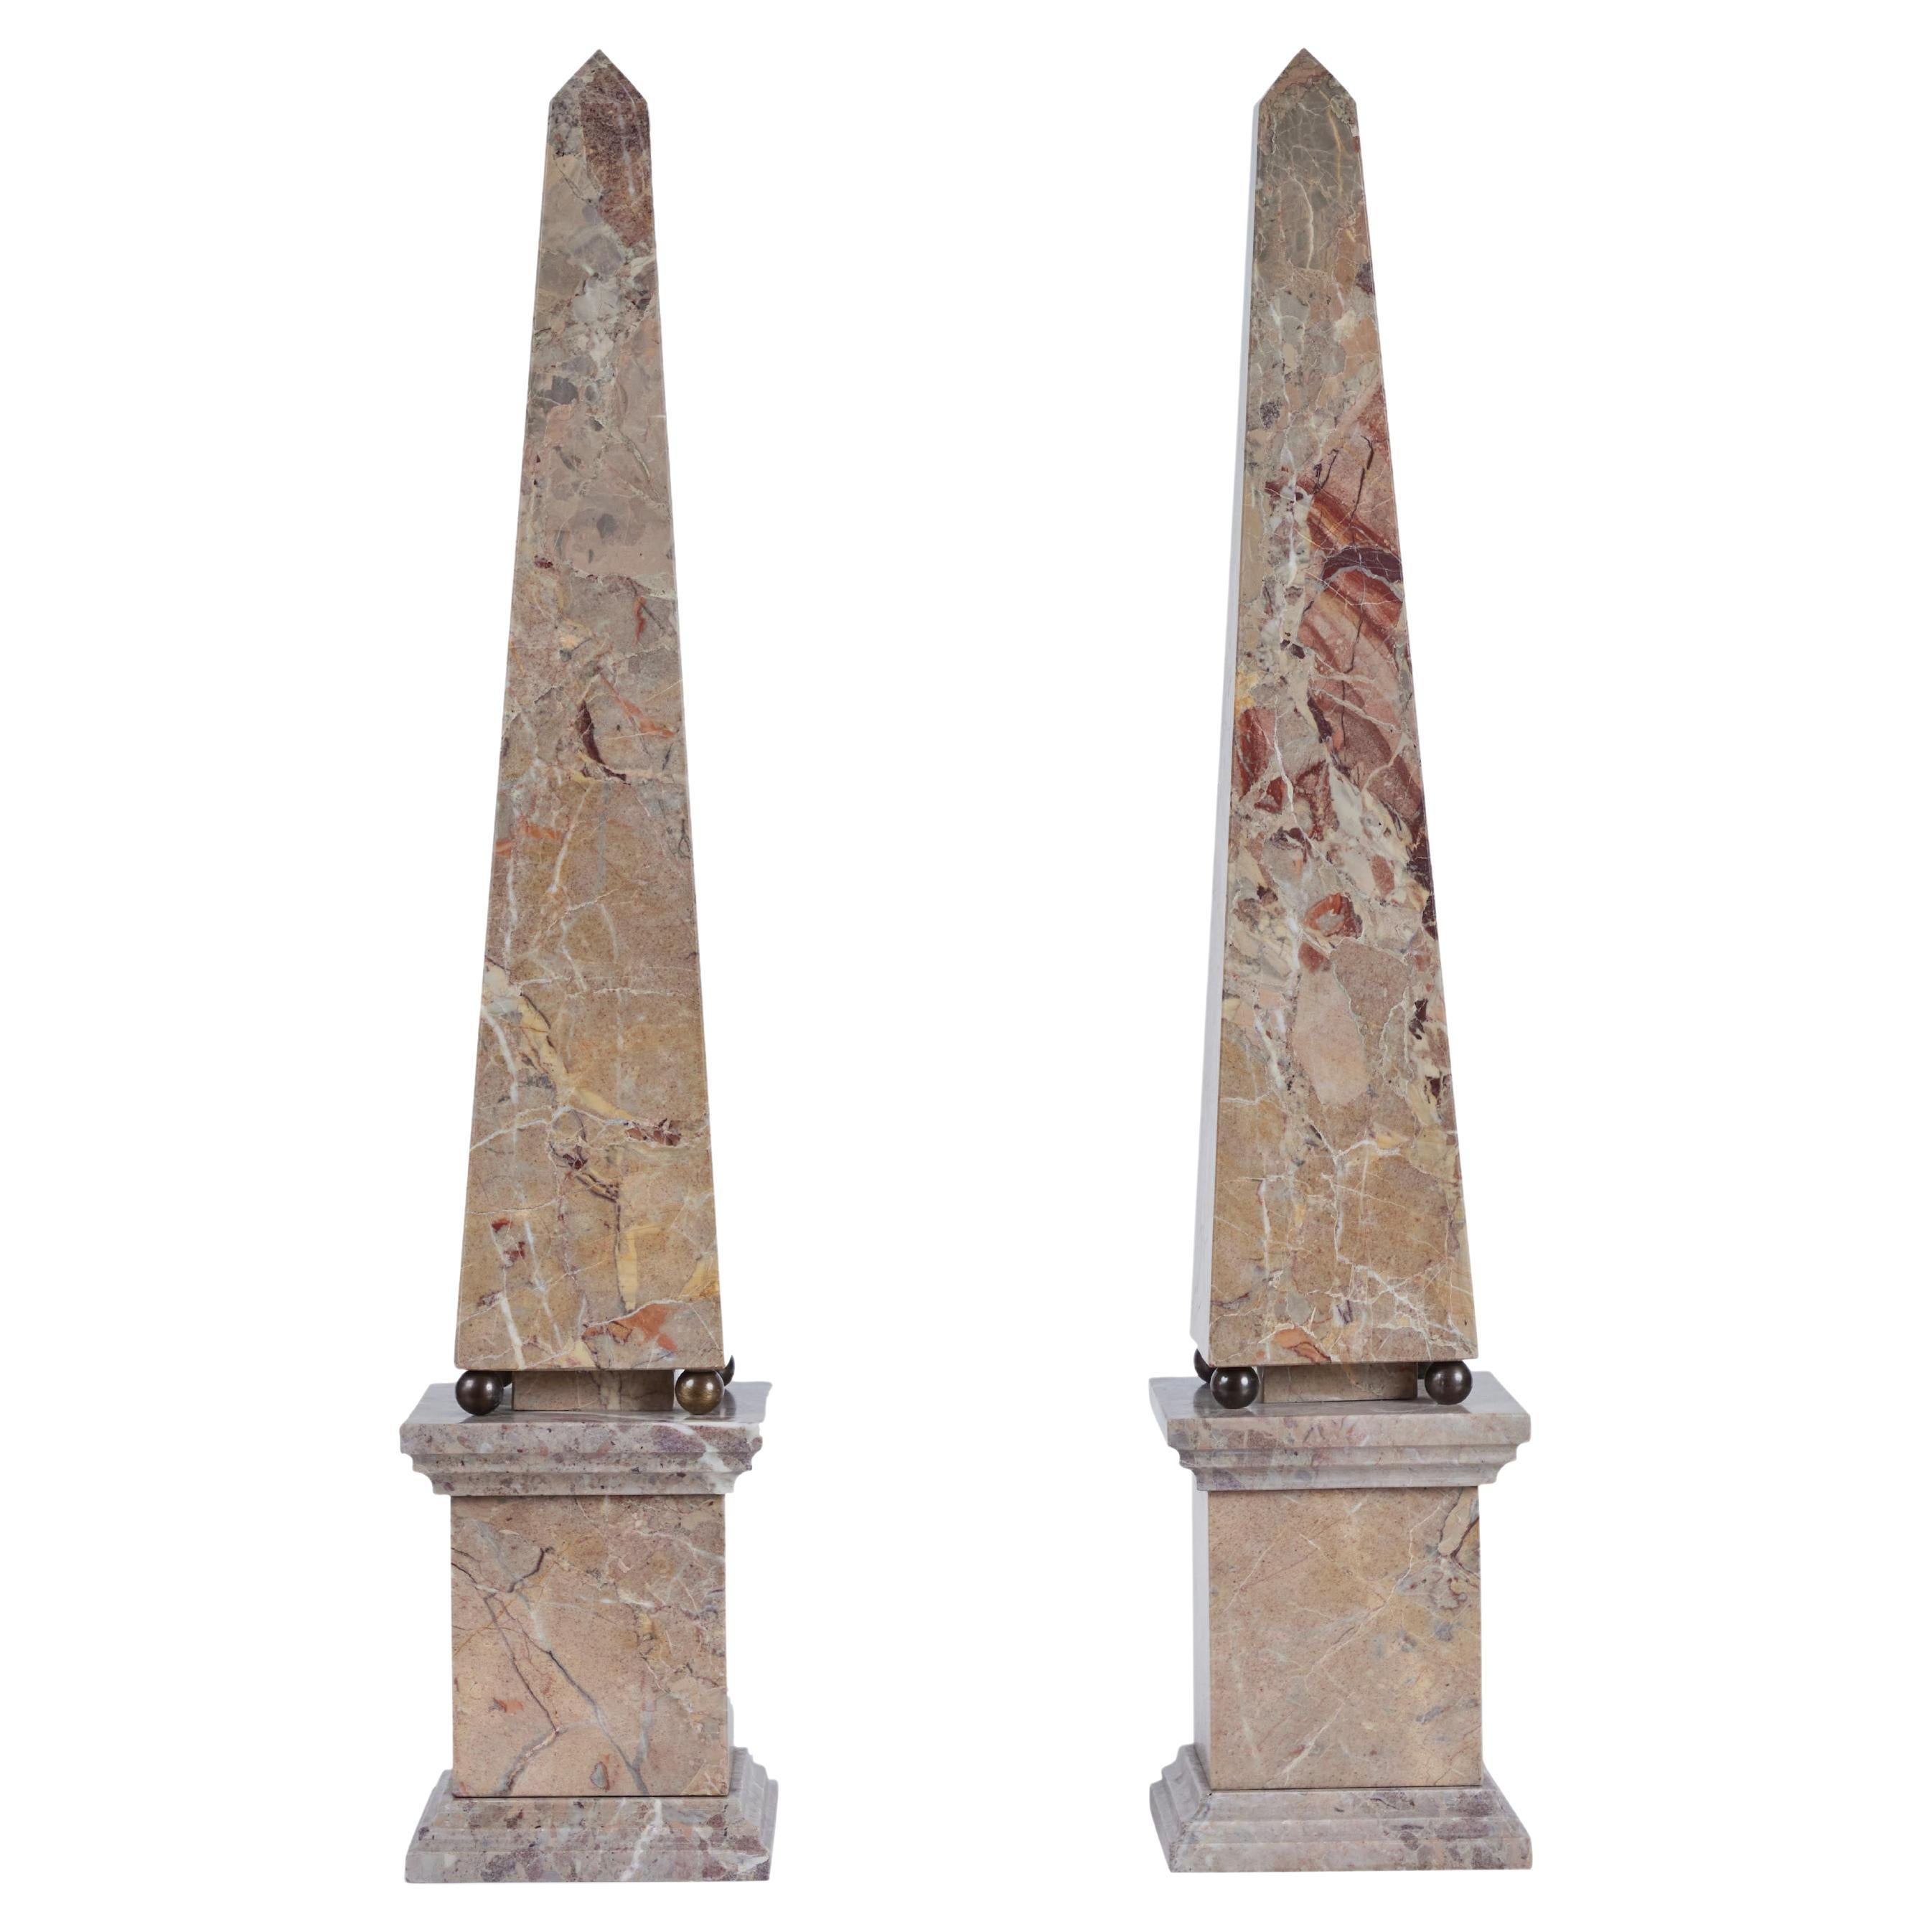 Pair of midcentury, Italian, polished marble obelisks atop four, bronze spheres, and mounted on a stepped plinth.